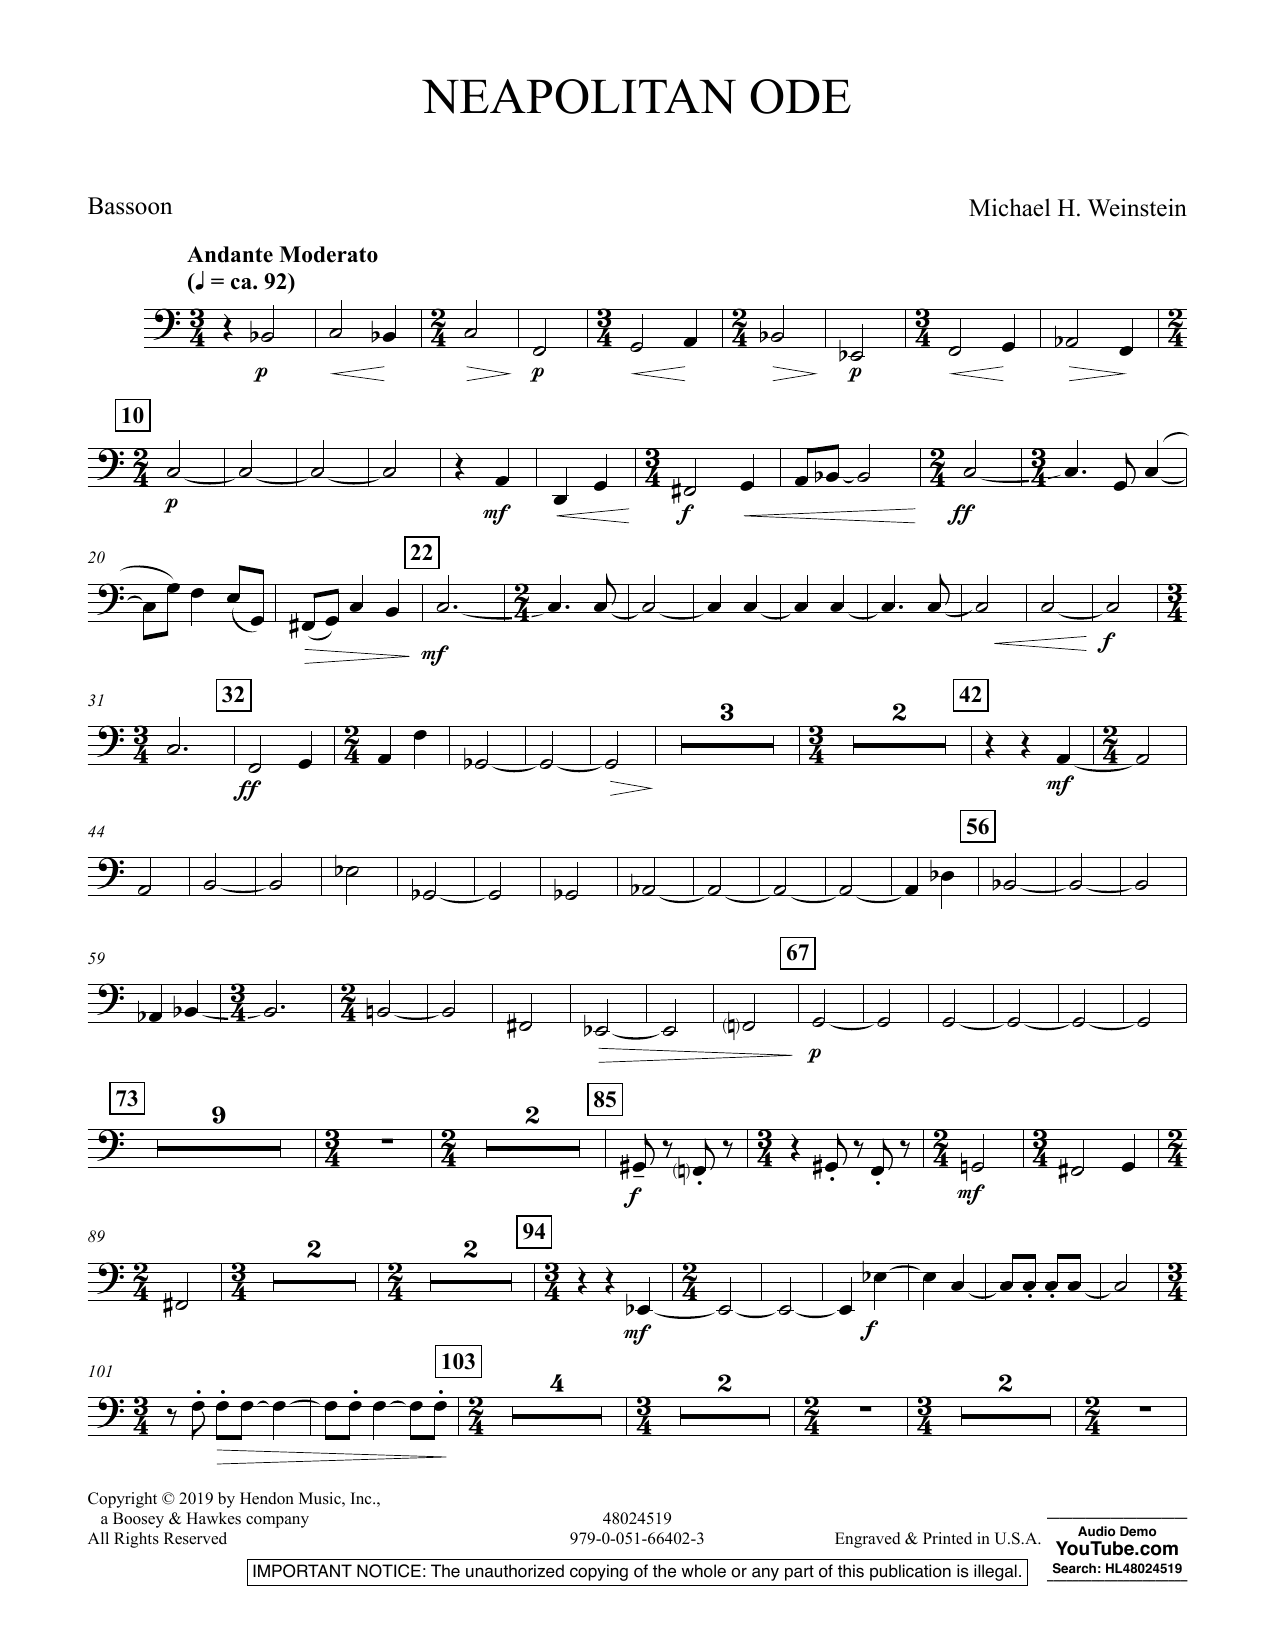 Michael H. Weinstein Neapolitan Ode - Bassoon sheet music preview music notes and score for Concert Band including 2 page(s)